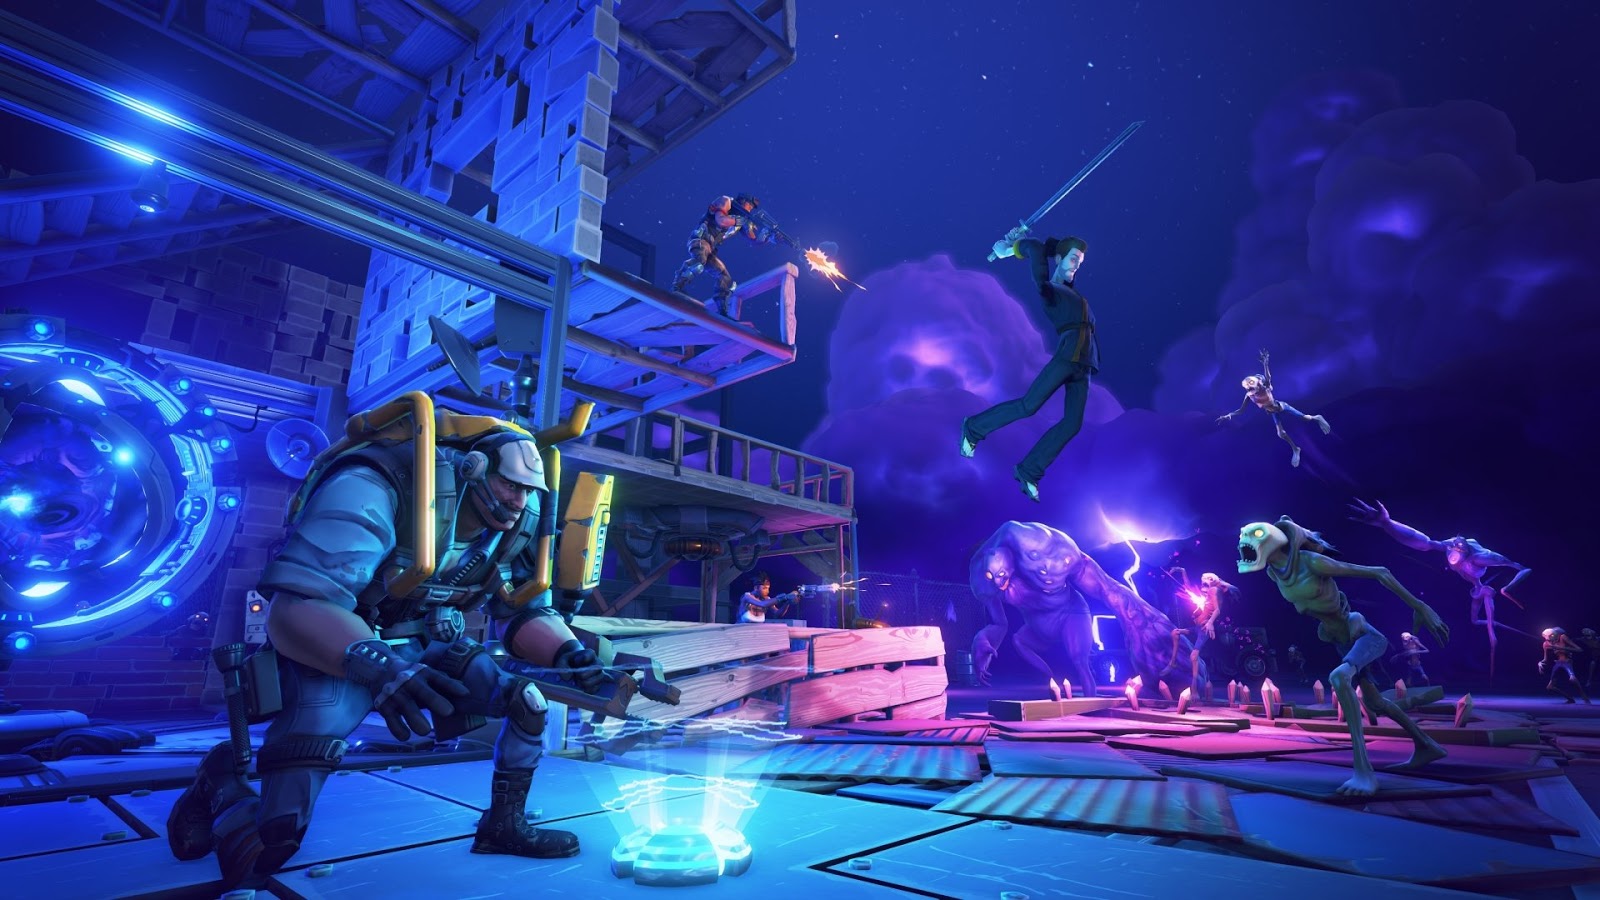 Download Fortnite HD Wallpapers Playstation Xbox and PC